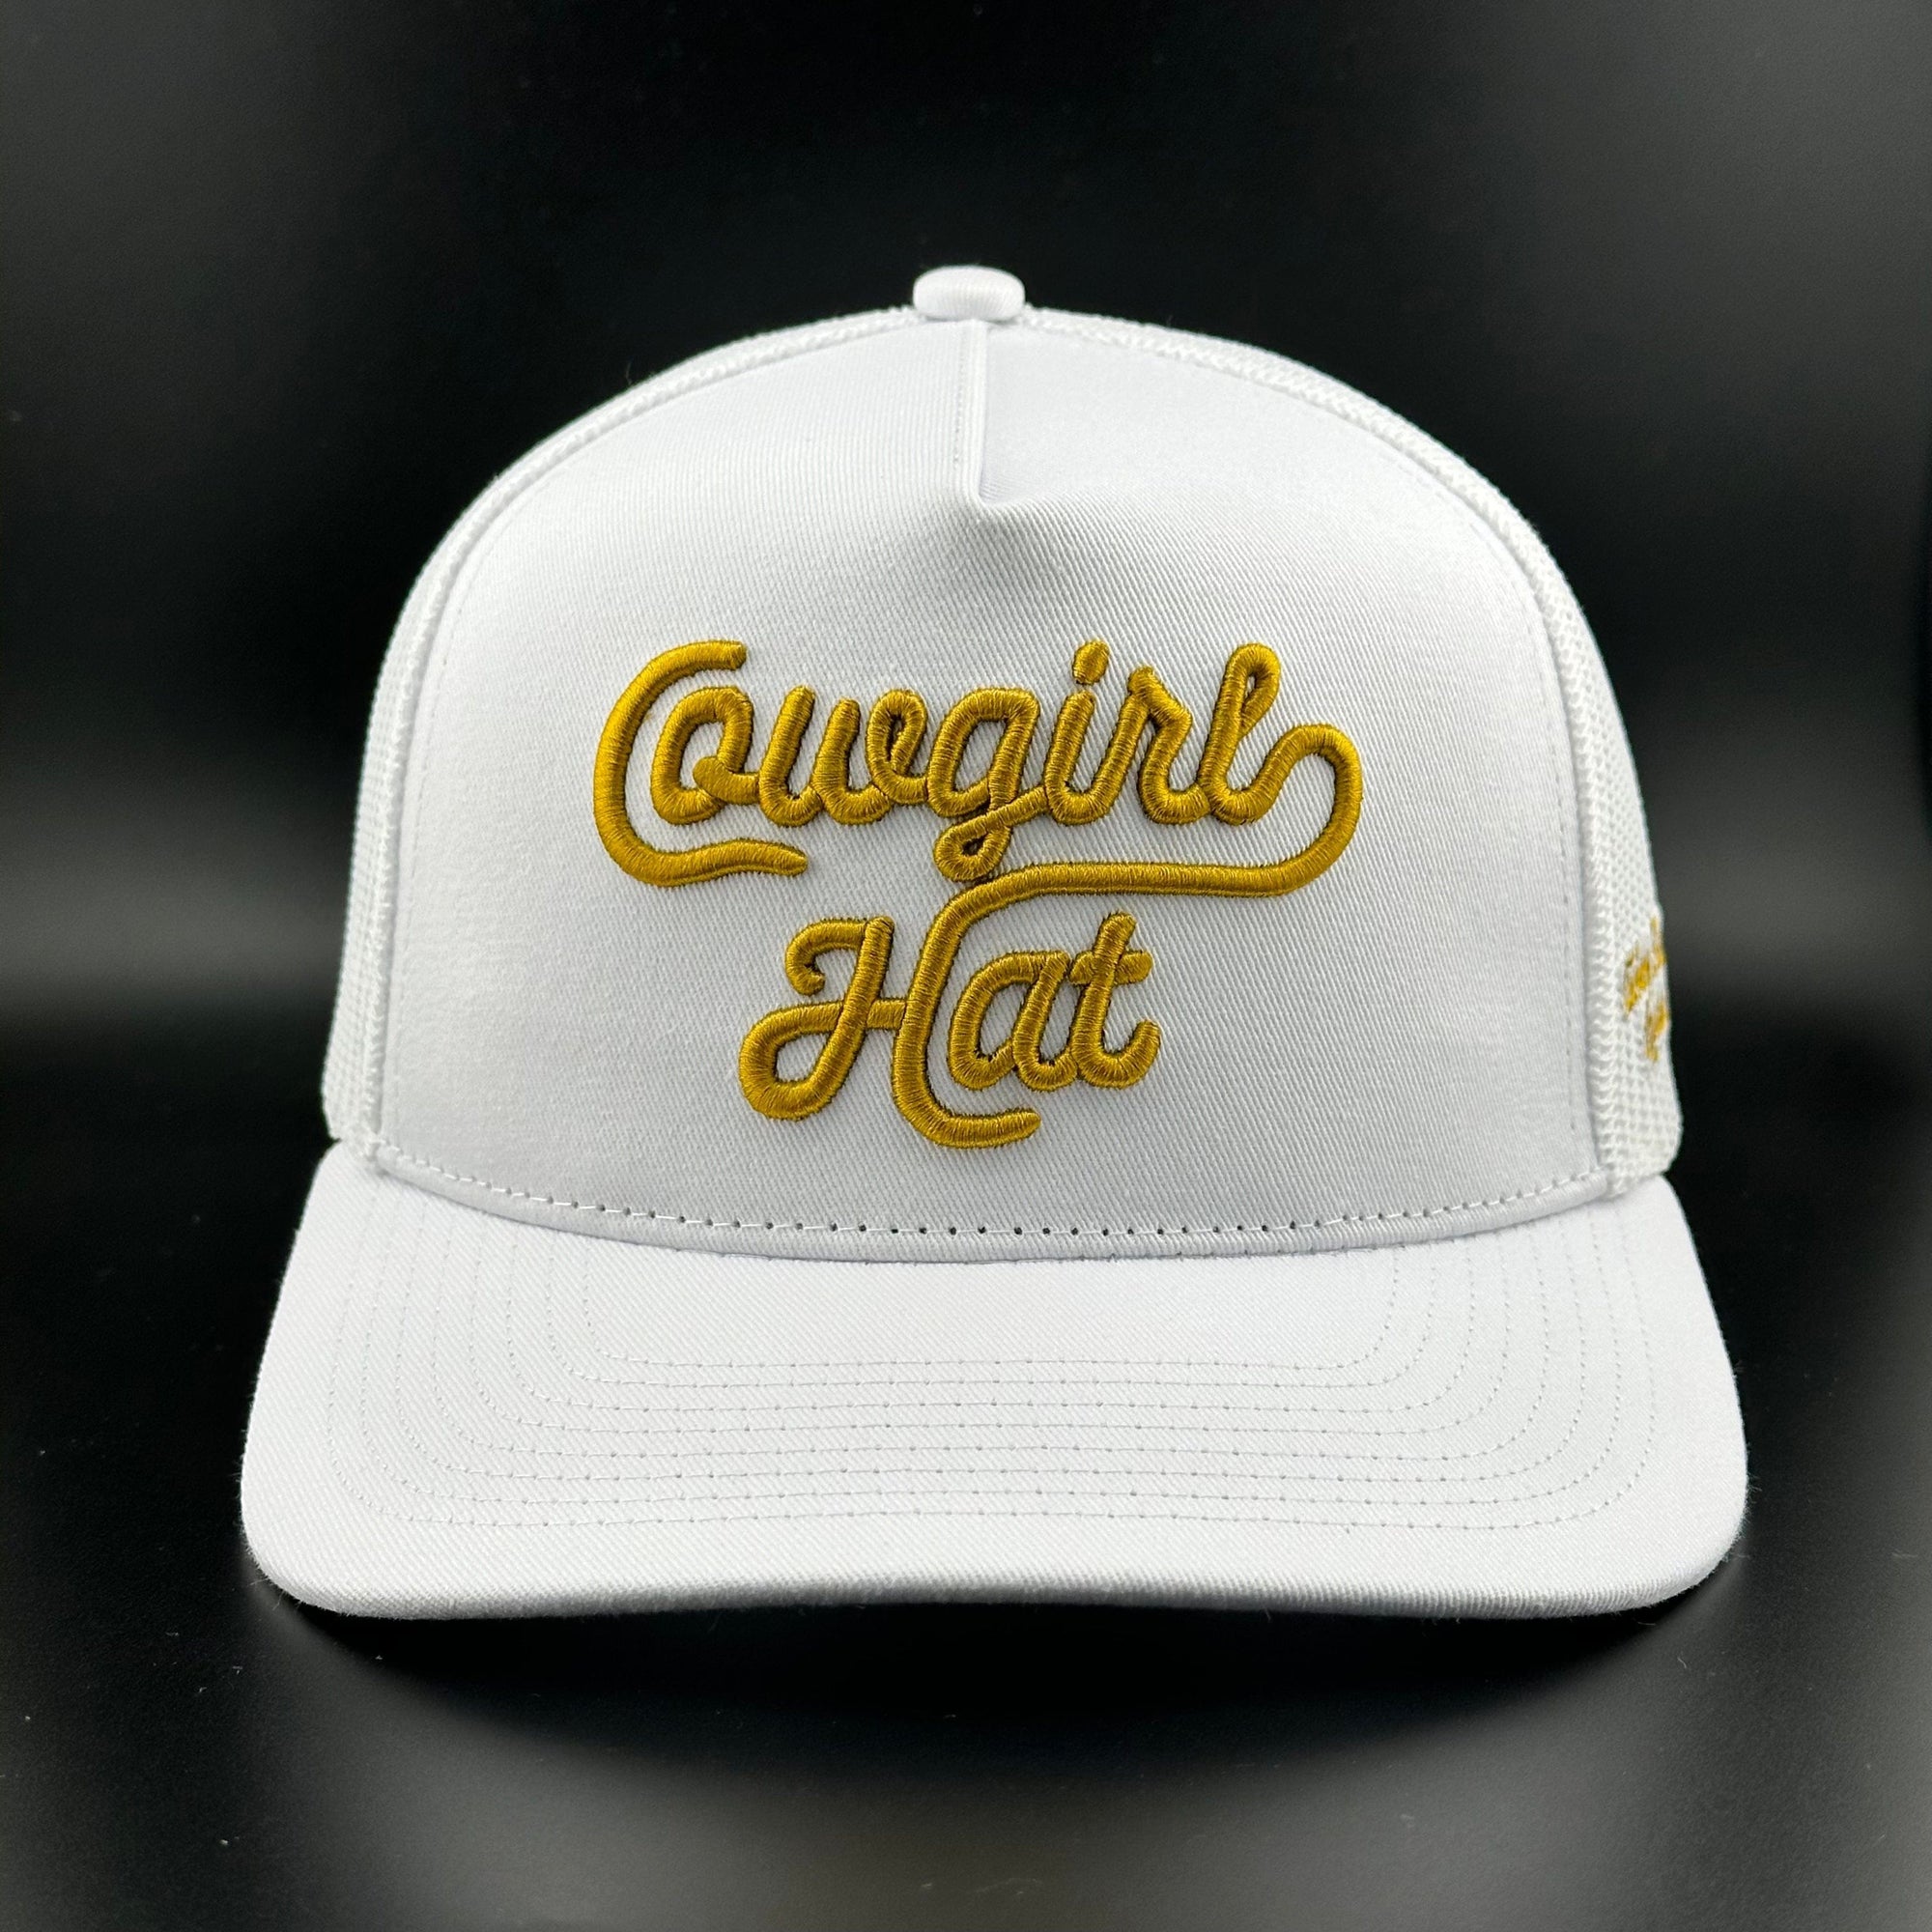 Cowboy Revolution Apparel Co. Hats One Size Fits Most “Cowgirl Hat” Cowboy Revolution White 5-panel Trucker Hat